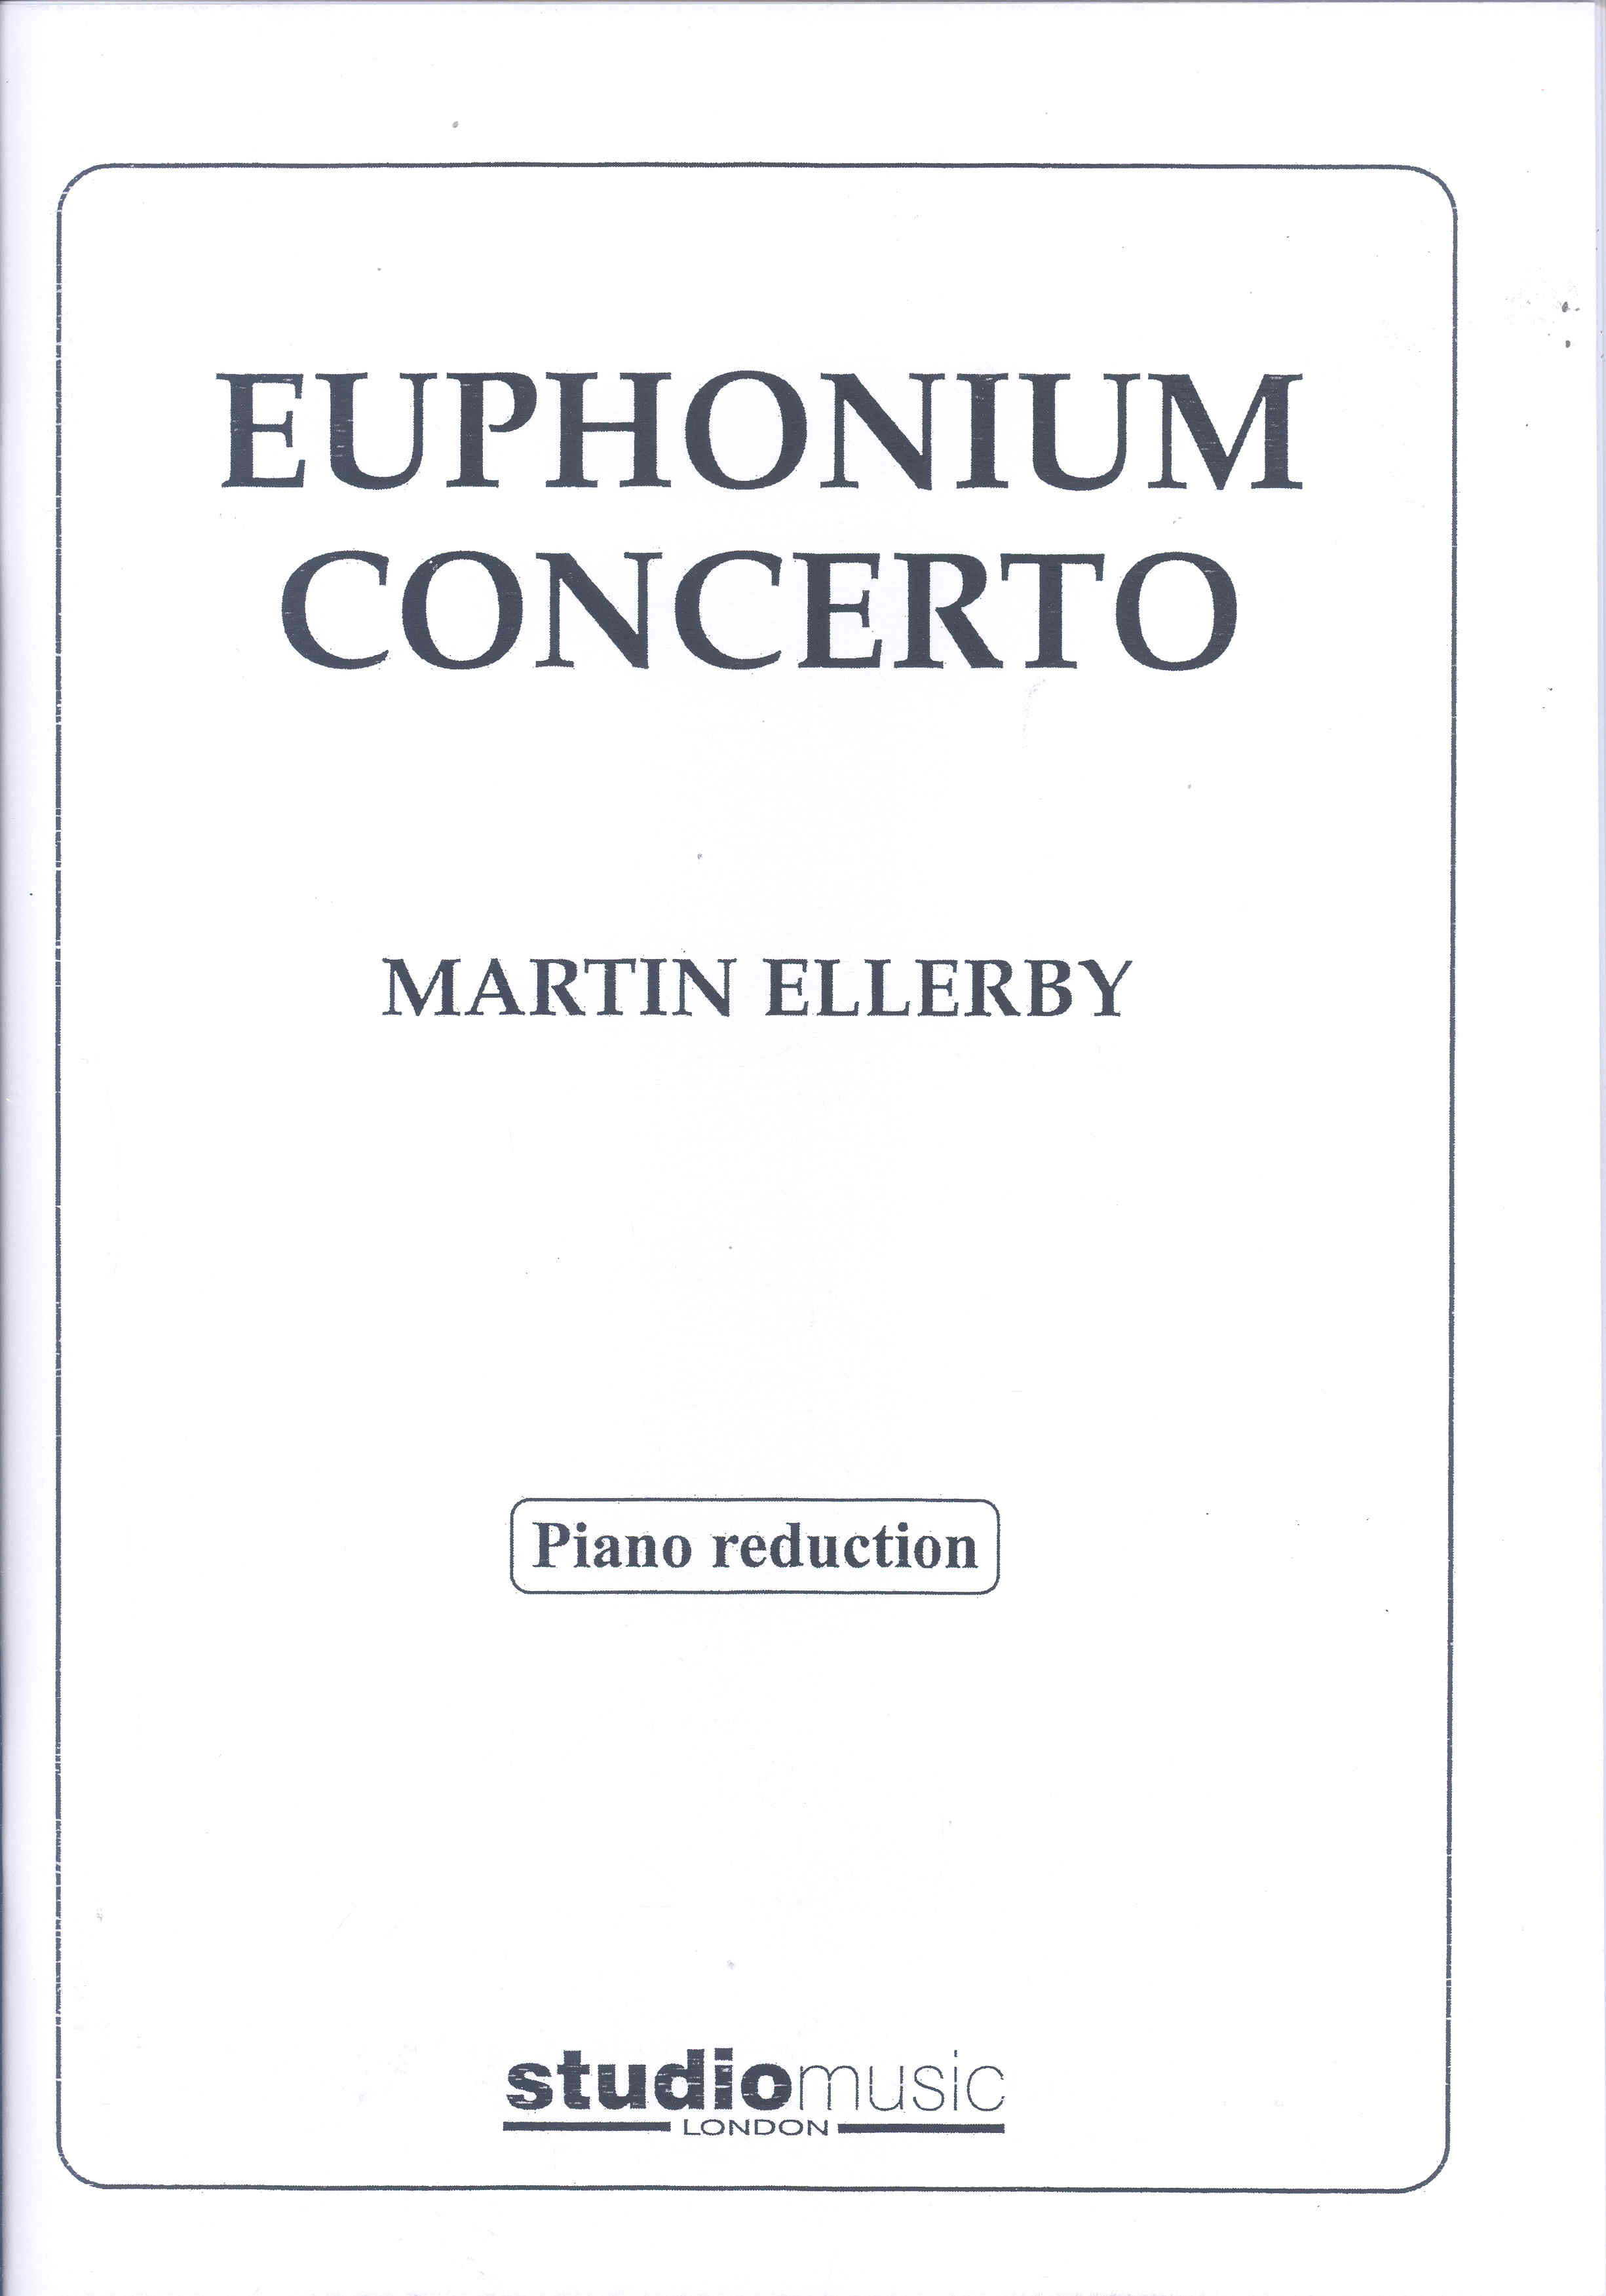 Ellerby Concerto Euphonium Piano Reduction Sheet Music Songbook